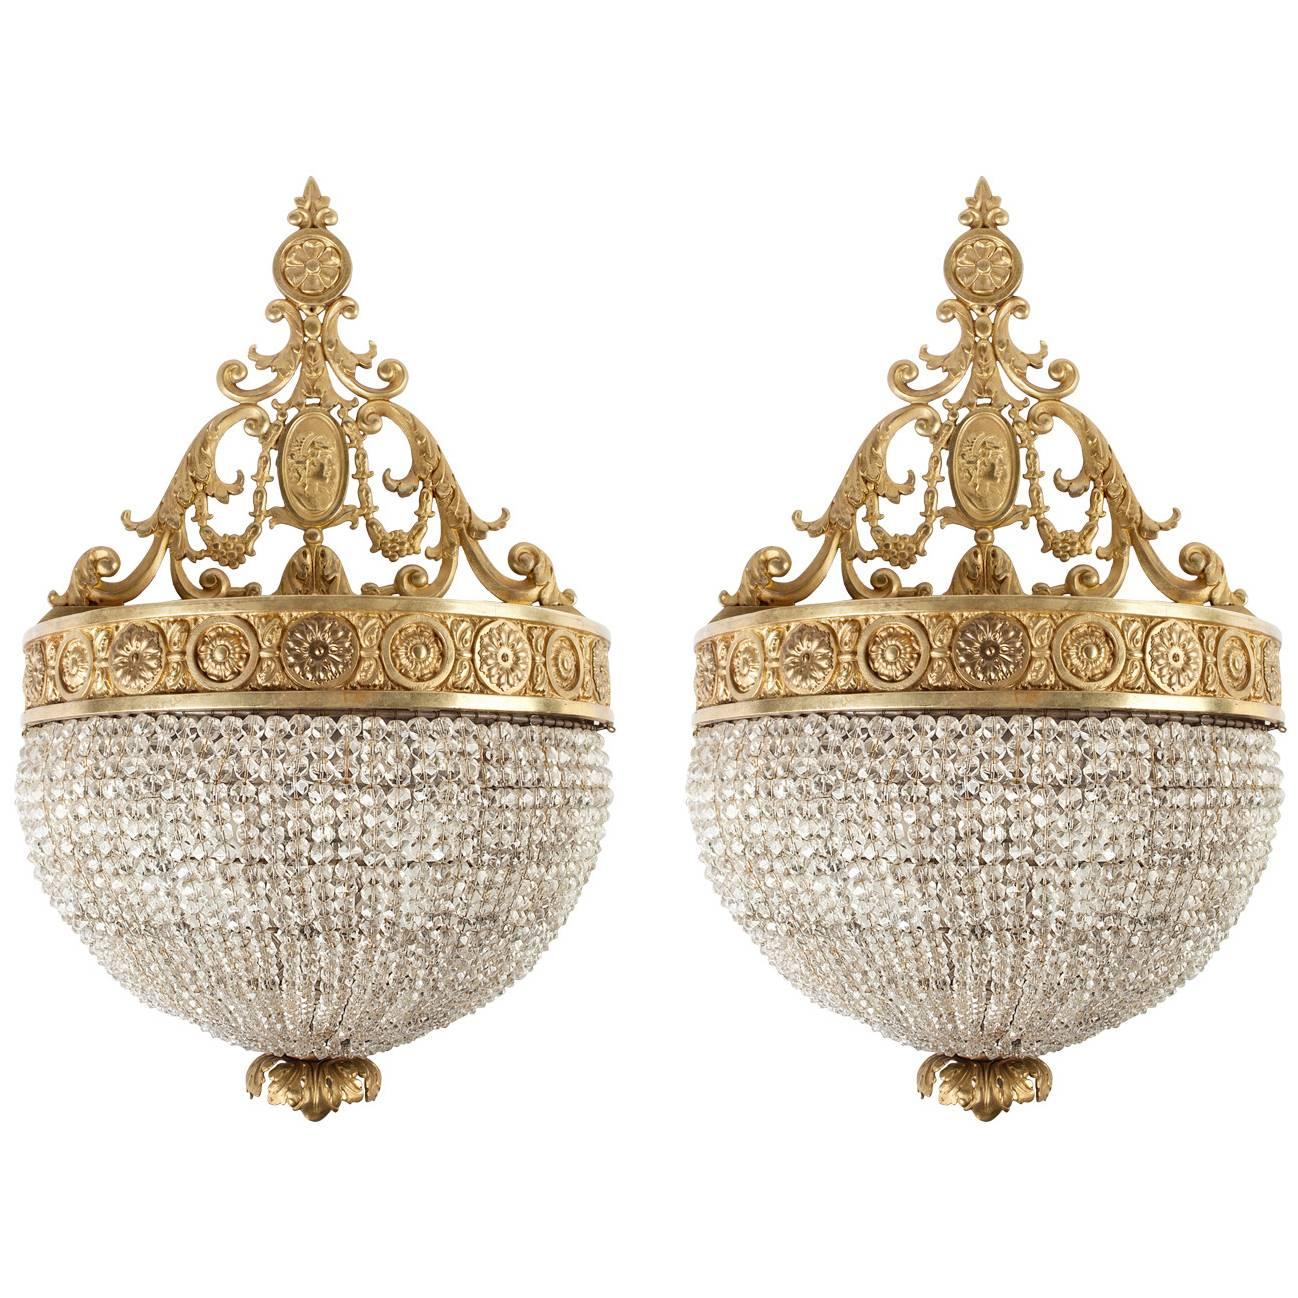 Gilded Brass Sconces with Cut Crystal Beaded Half Dome Bodies, Circa 1920s For Sale